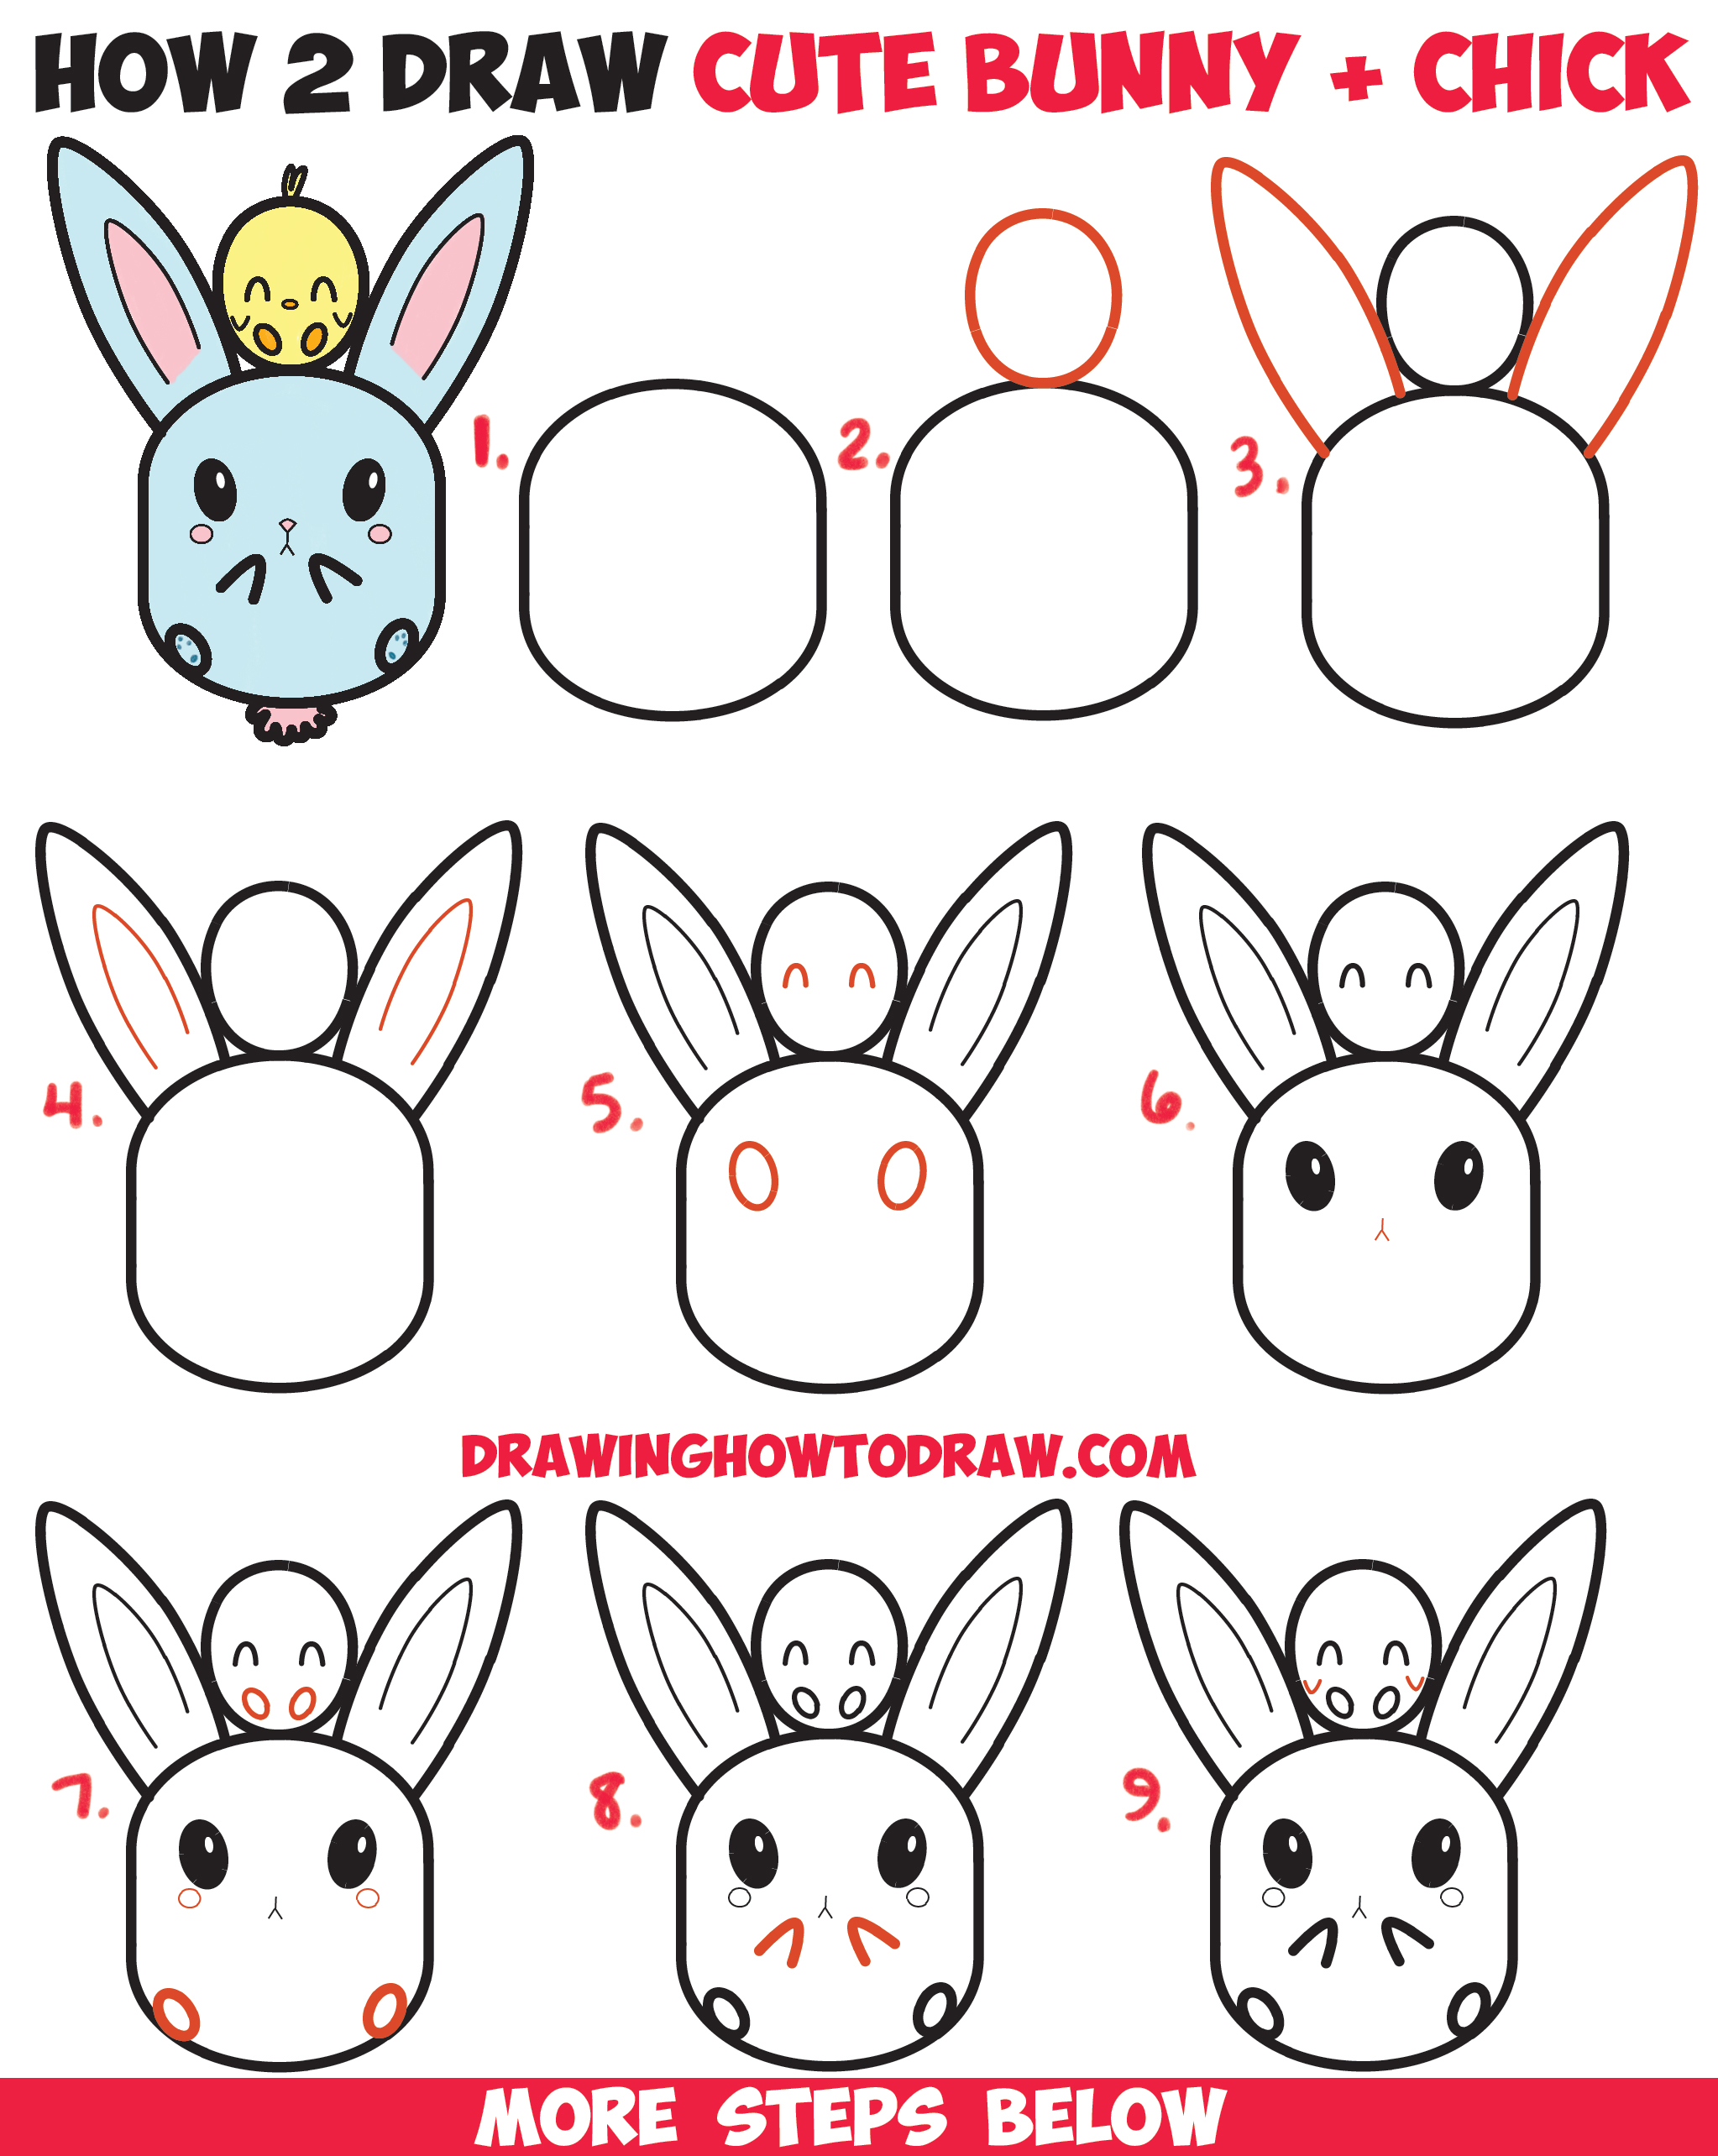 Easy Bunny Drawing (How to Draw Tutorial) - Crafty Morning